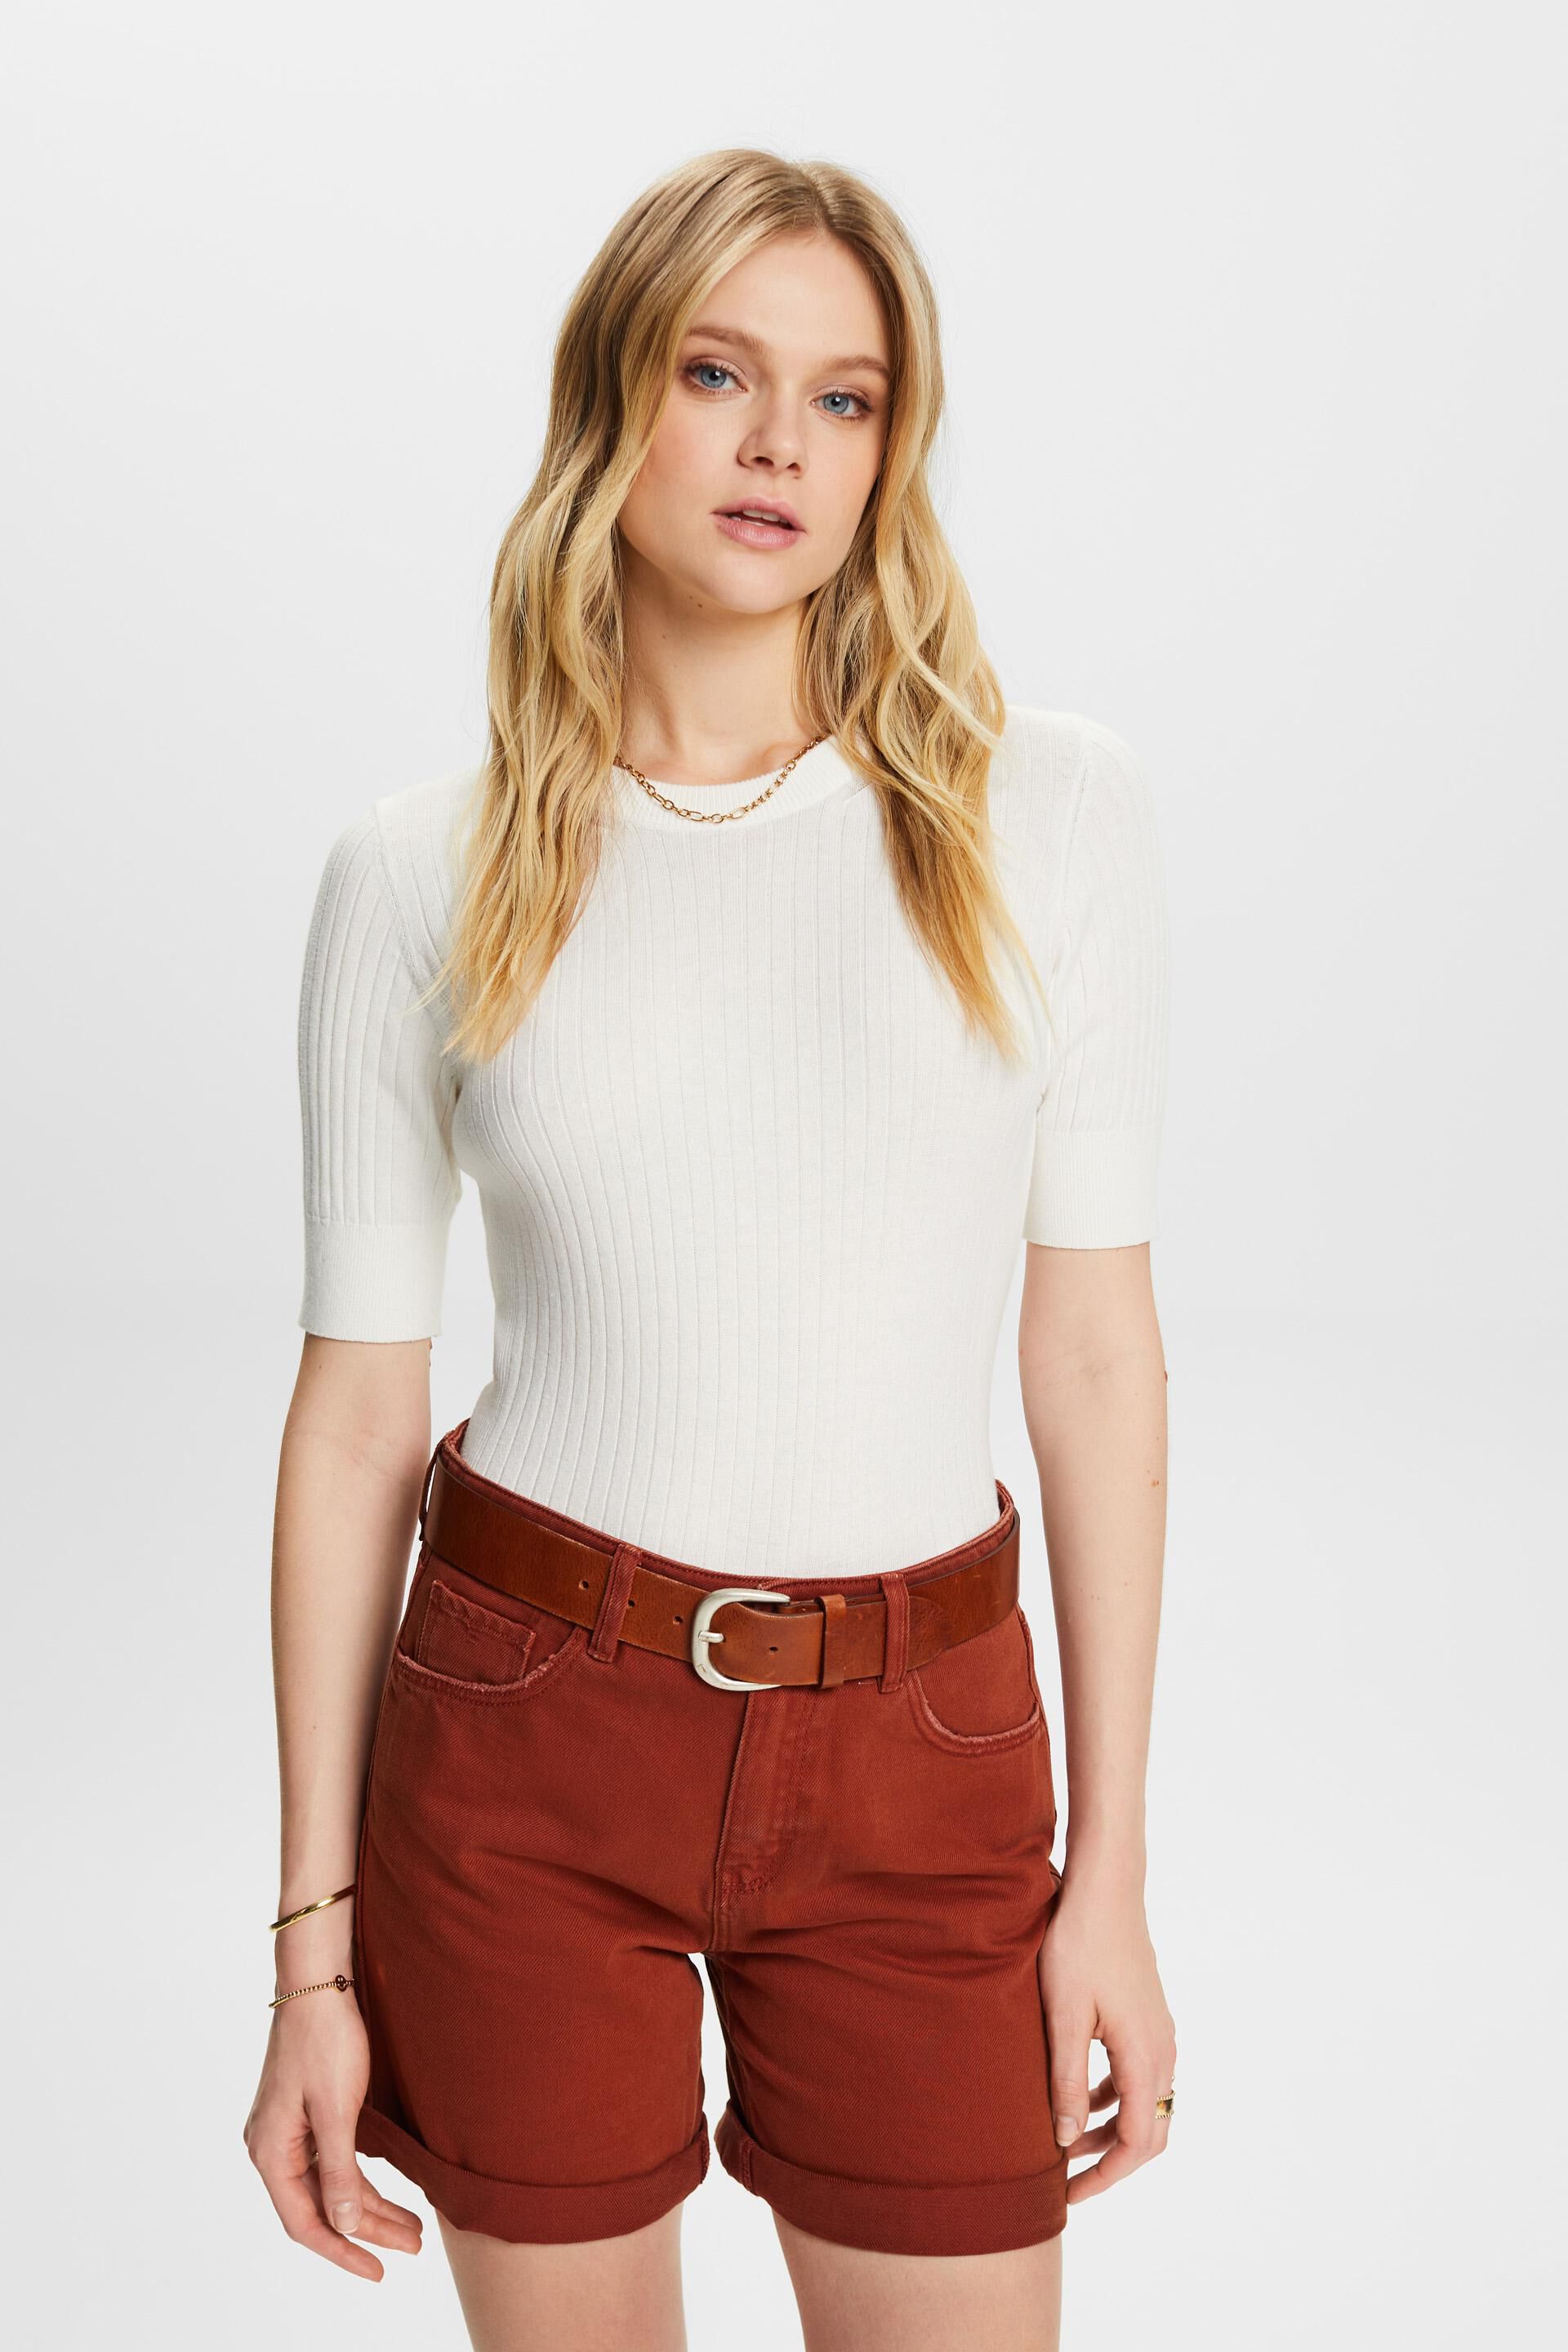 Esprit sweater ribbed Short-sleeved